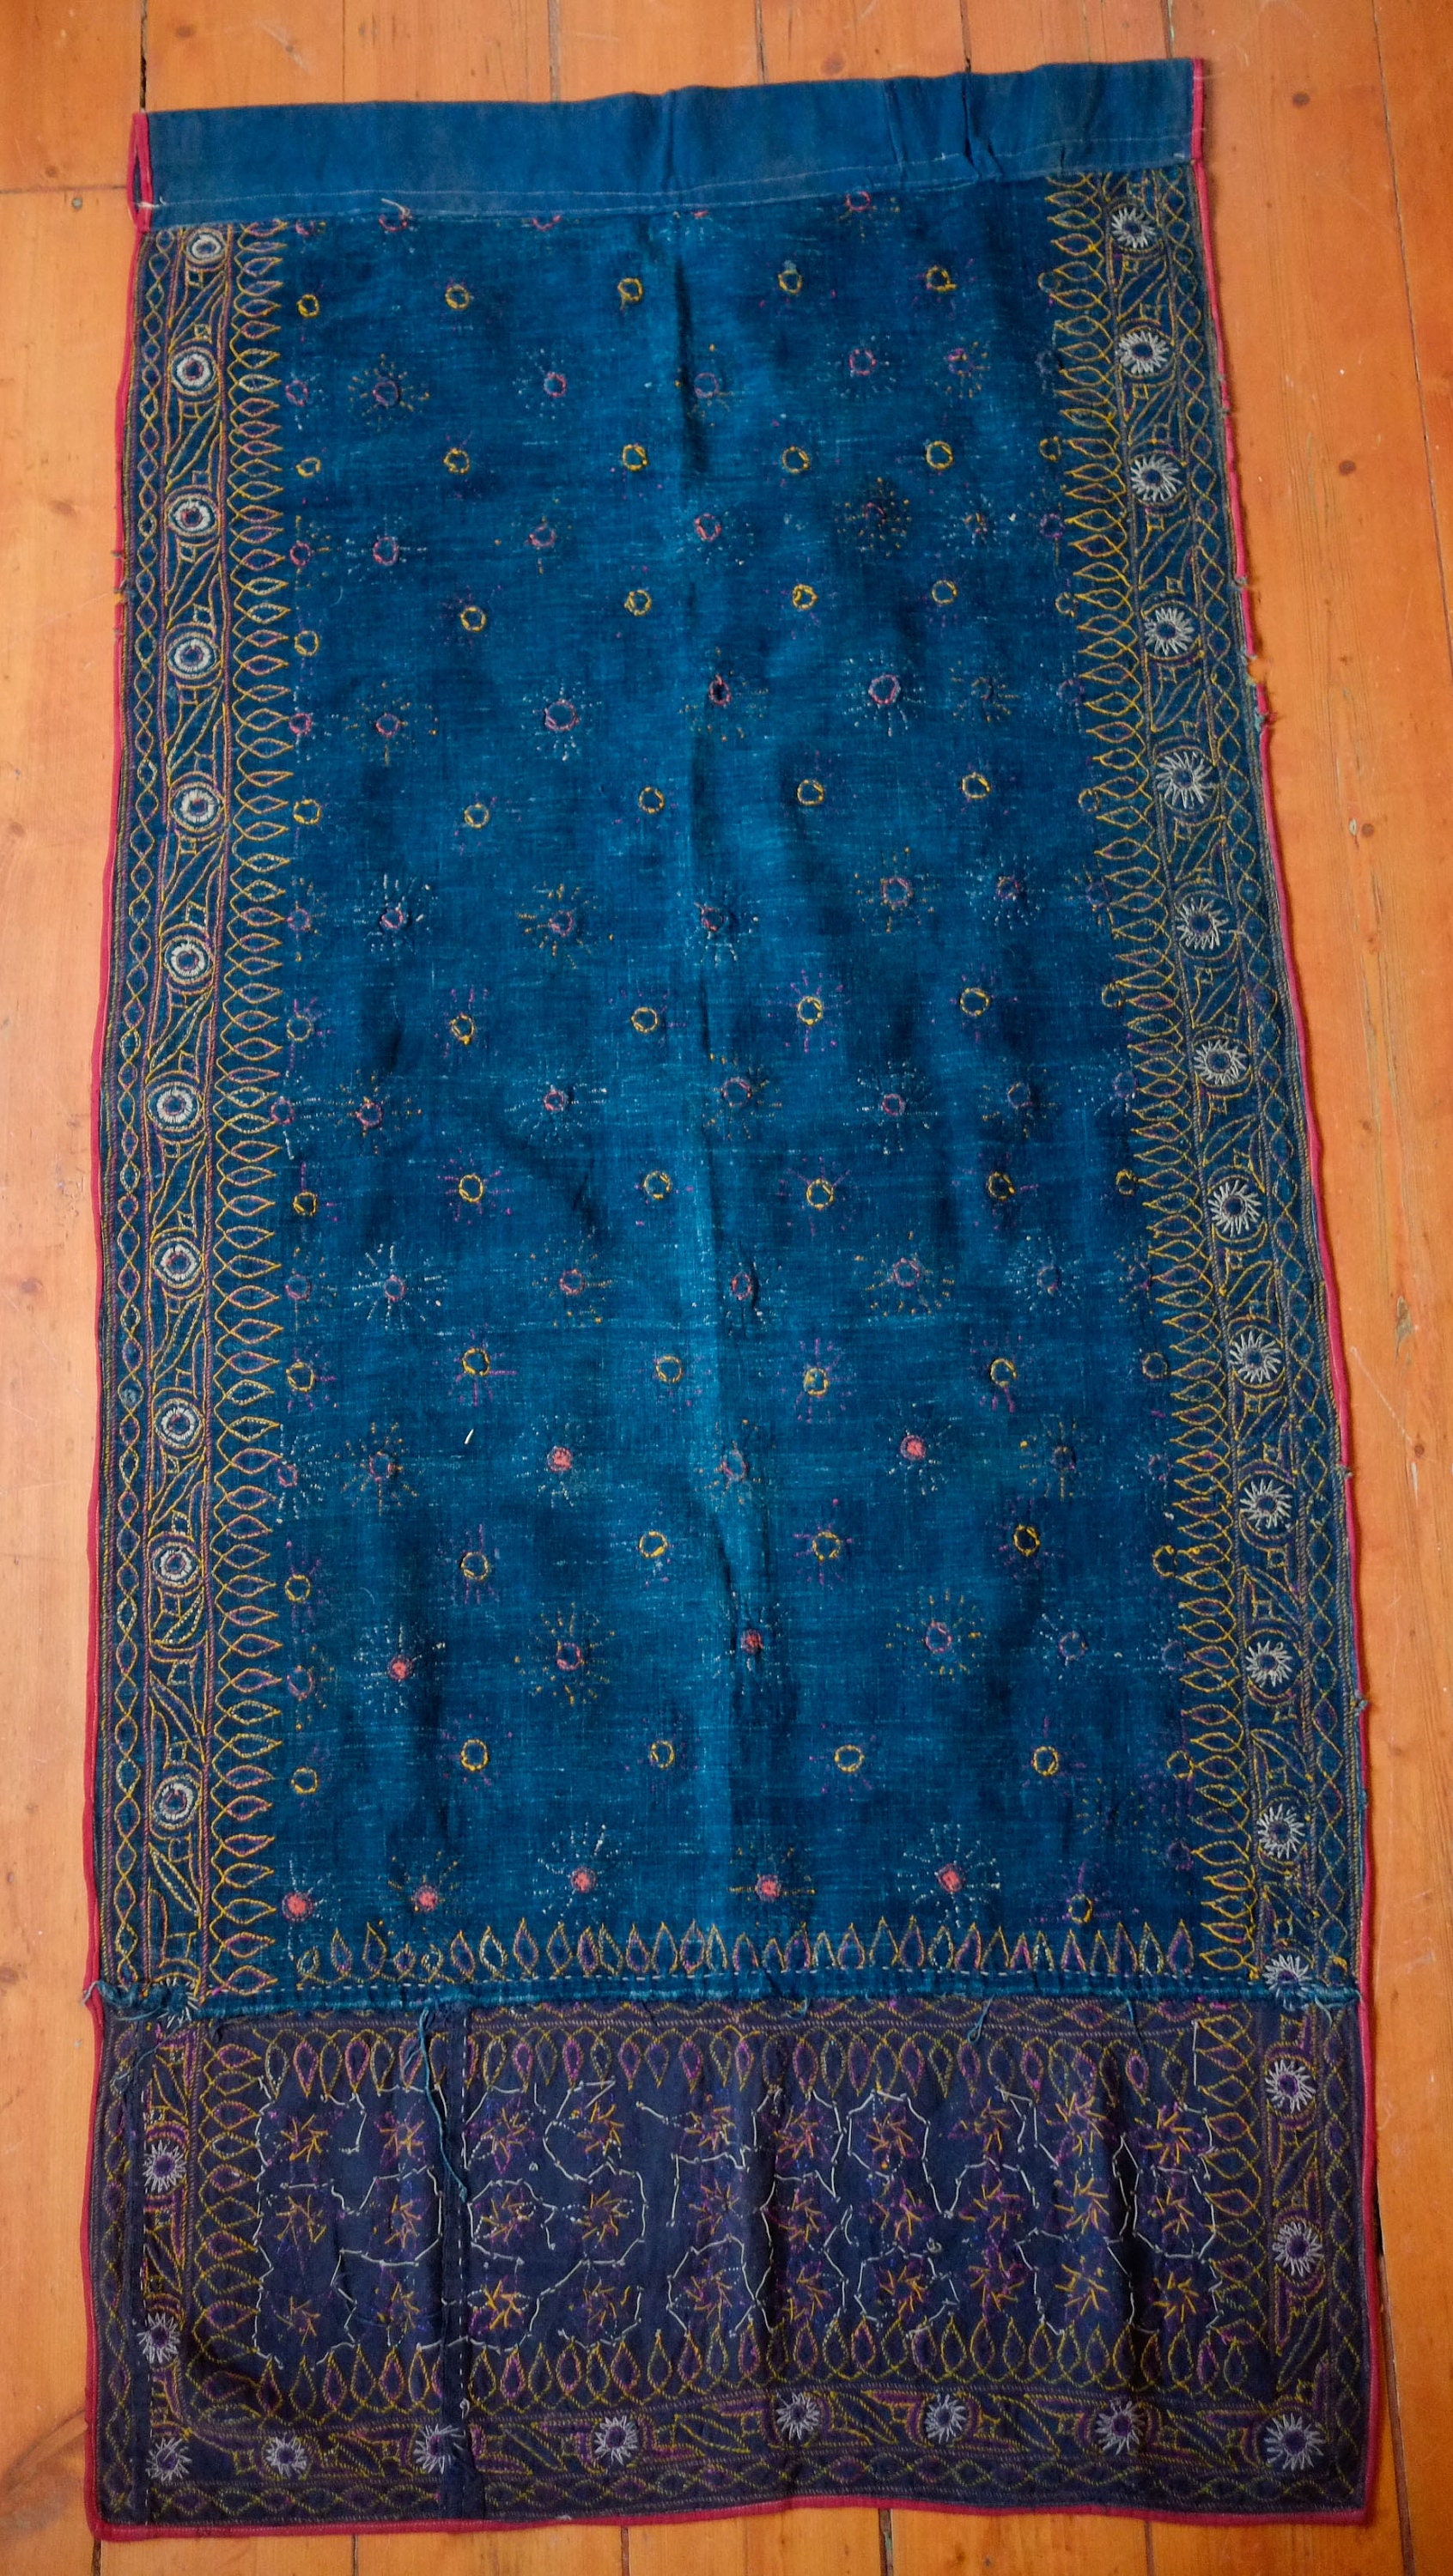 Kutch or Gujarat Embroidery Cloth India - Etsy